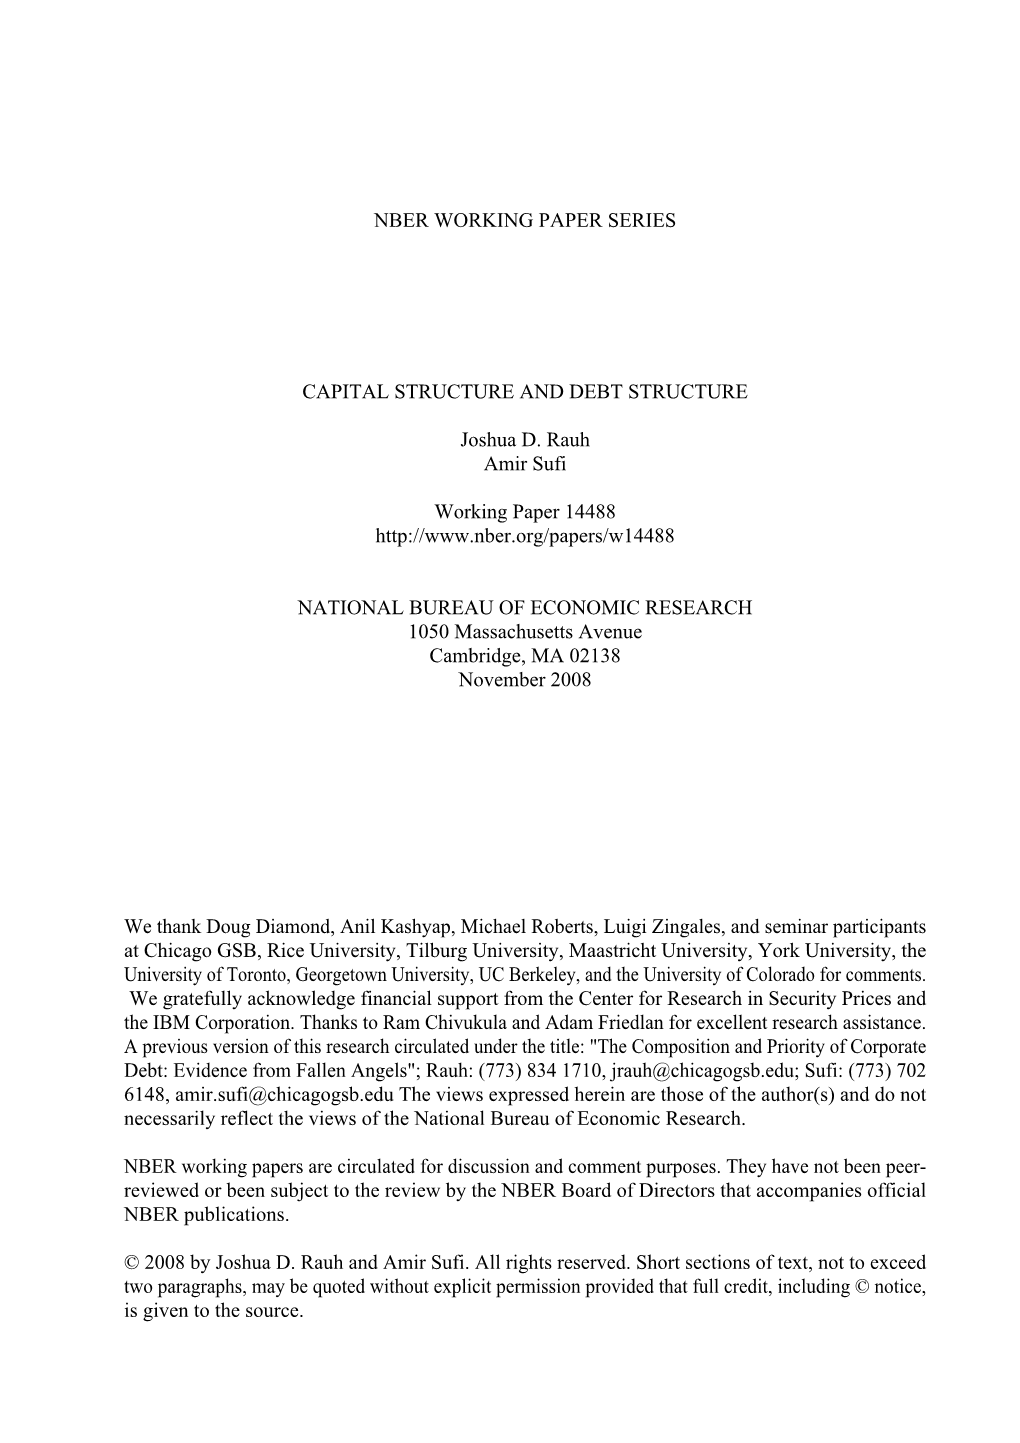 Nber Working Paper Series Capital Structure and Debt